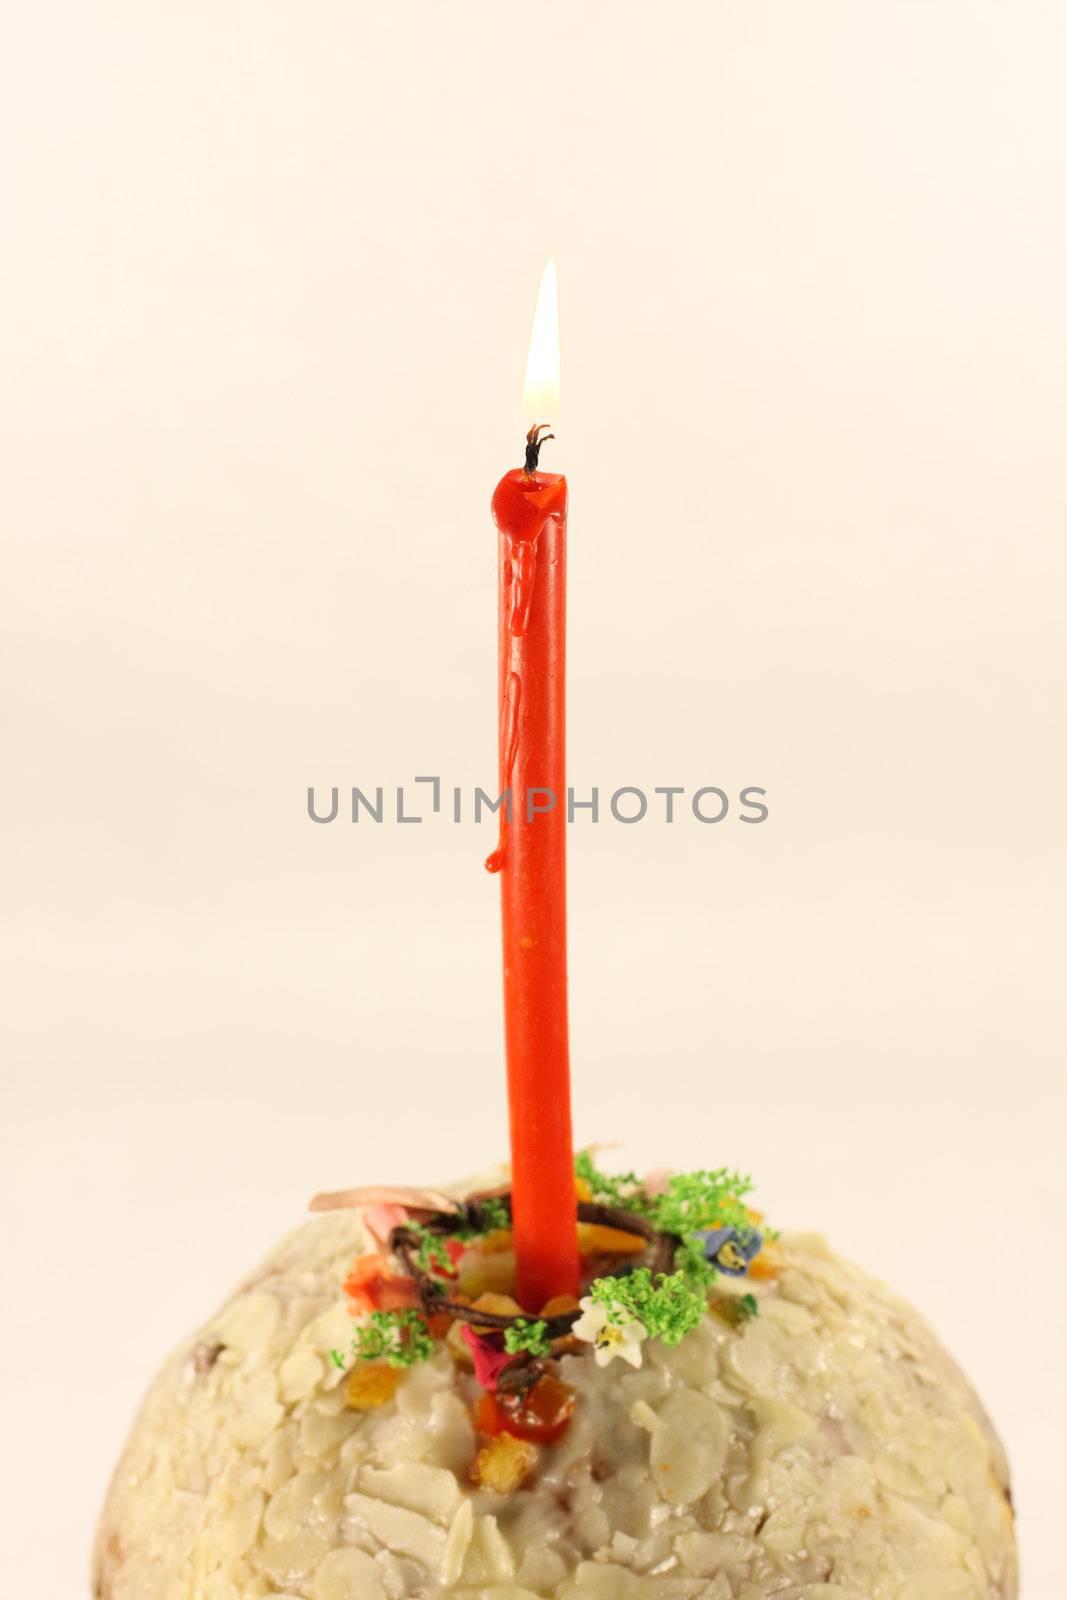 Easter, Easter cake, candle, fruitcake, batch, pie, fire, holiday, still-life, meal, food